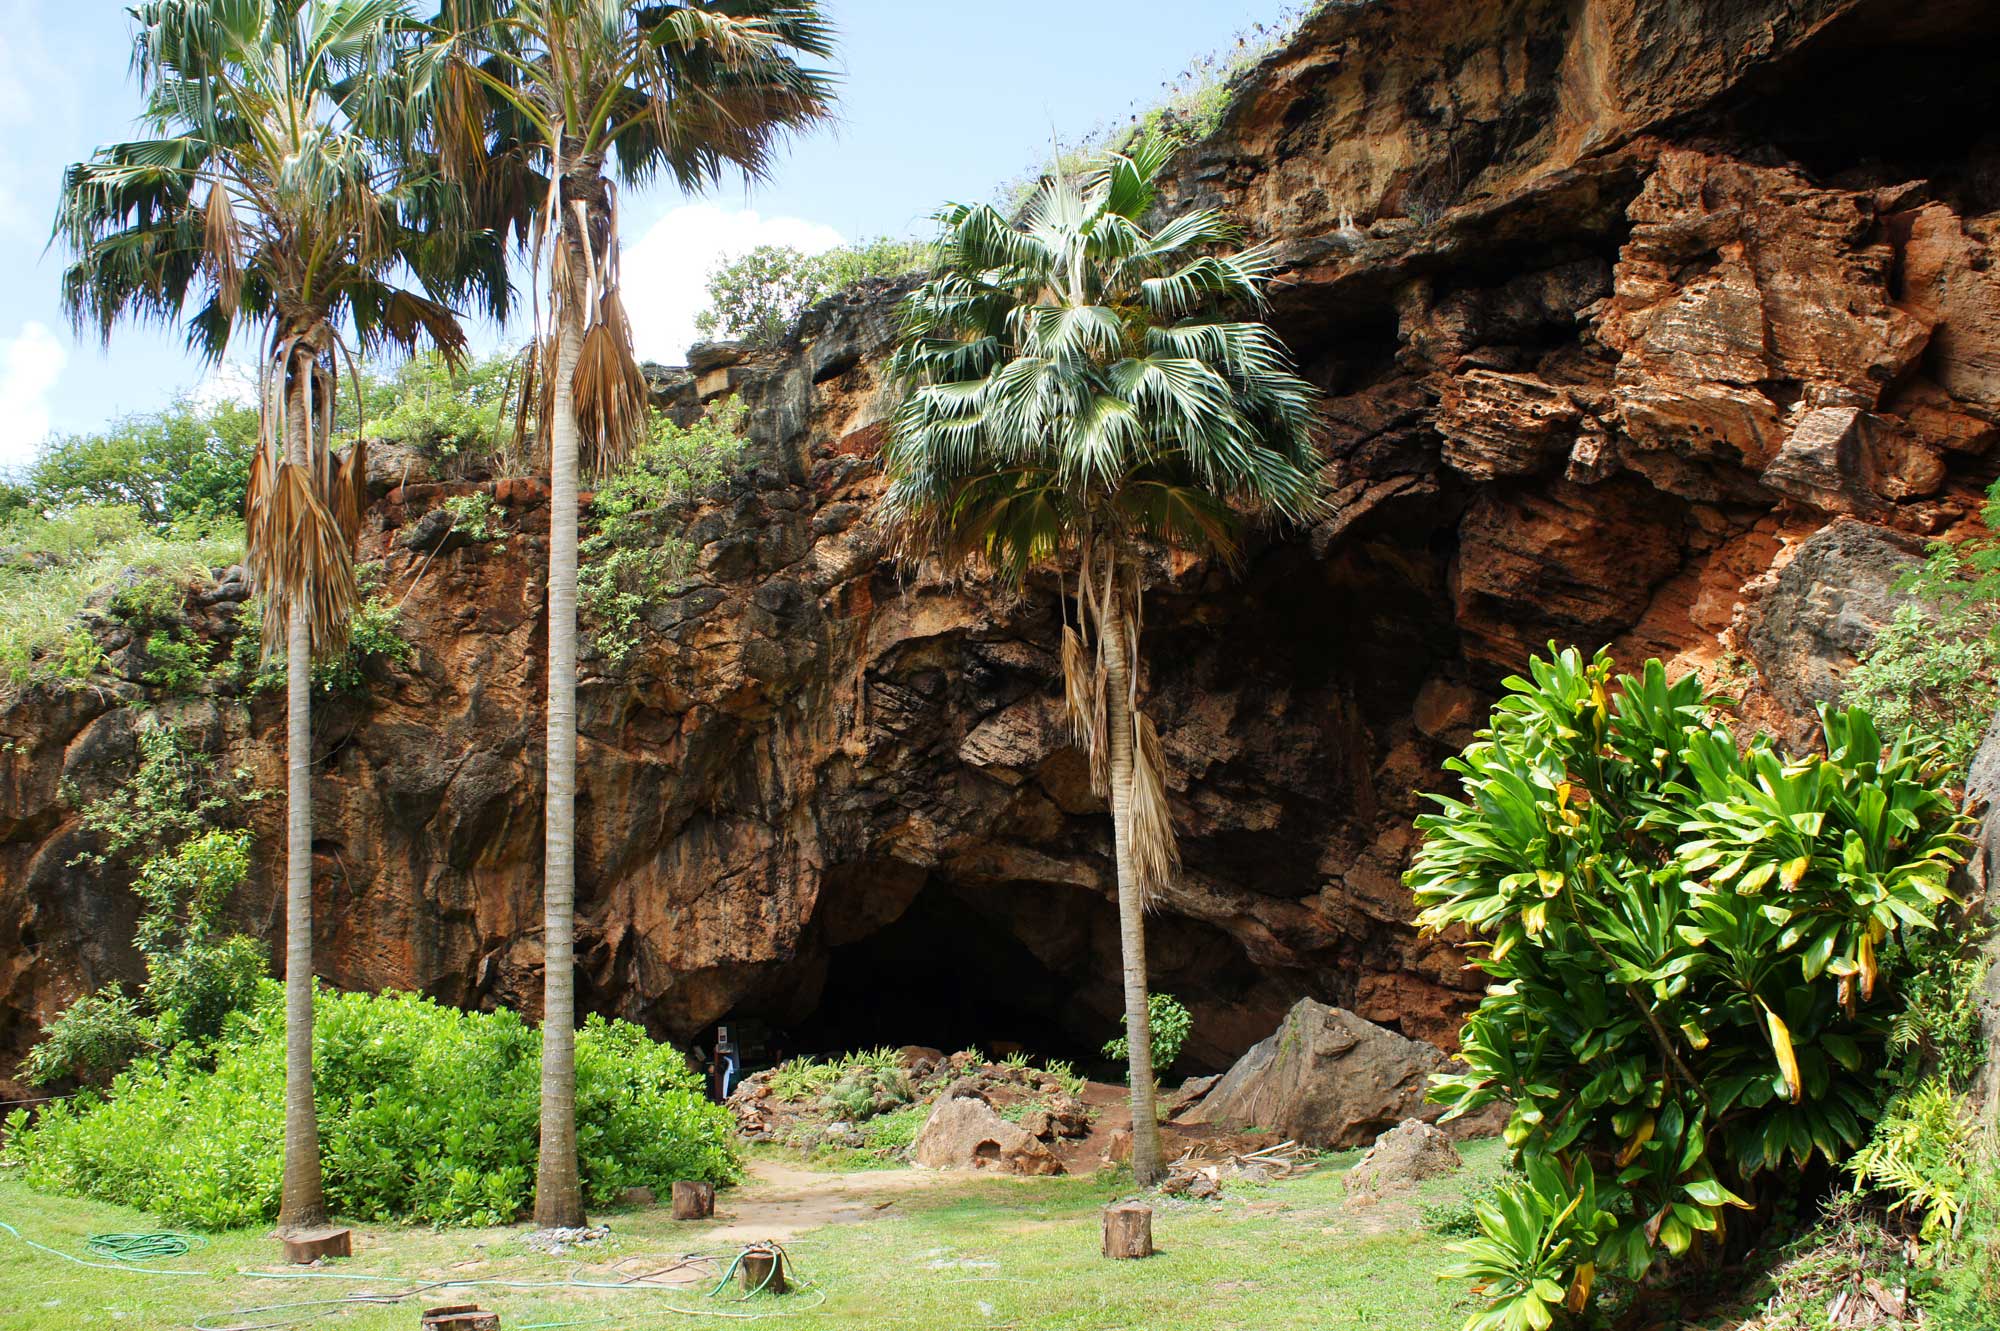 Photograph of Makauwahi Cave in Kauai. The photo shows a hill with an exposed limestone cliff face. At the base of the cliff is a roughly rectangular cave entrance. Three palm trees stand in front of the cave.